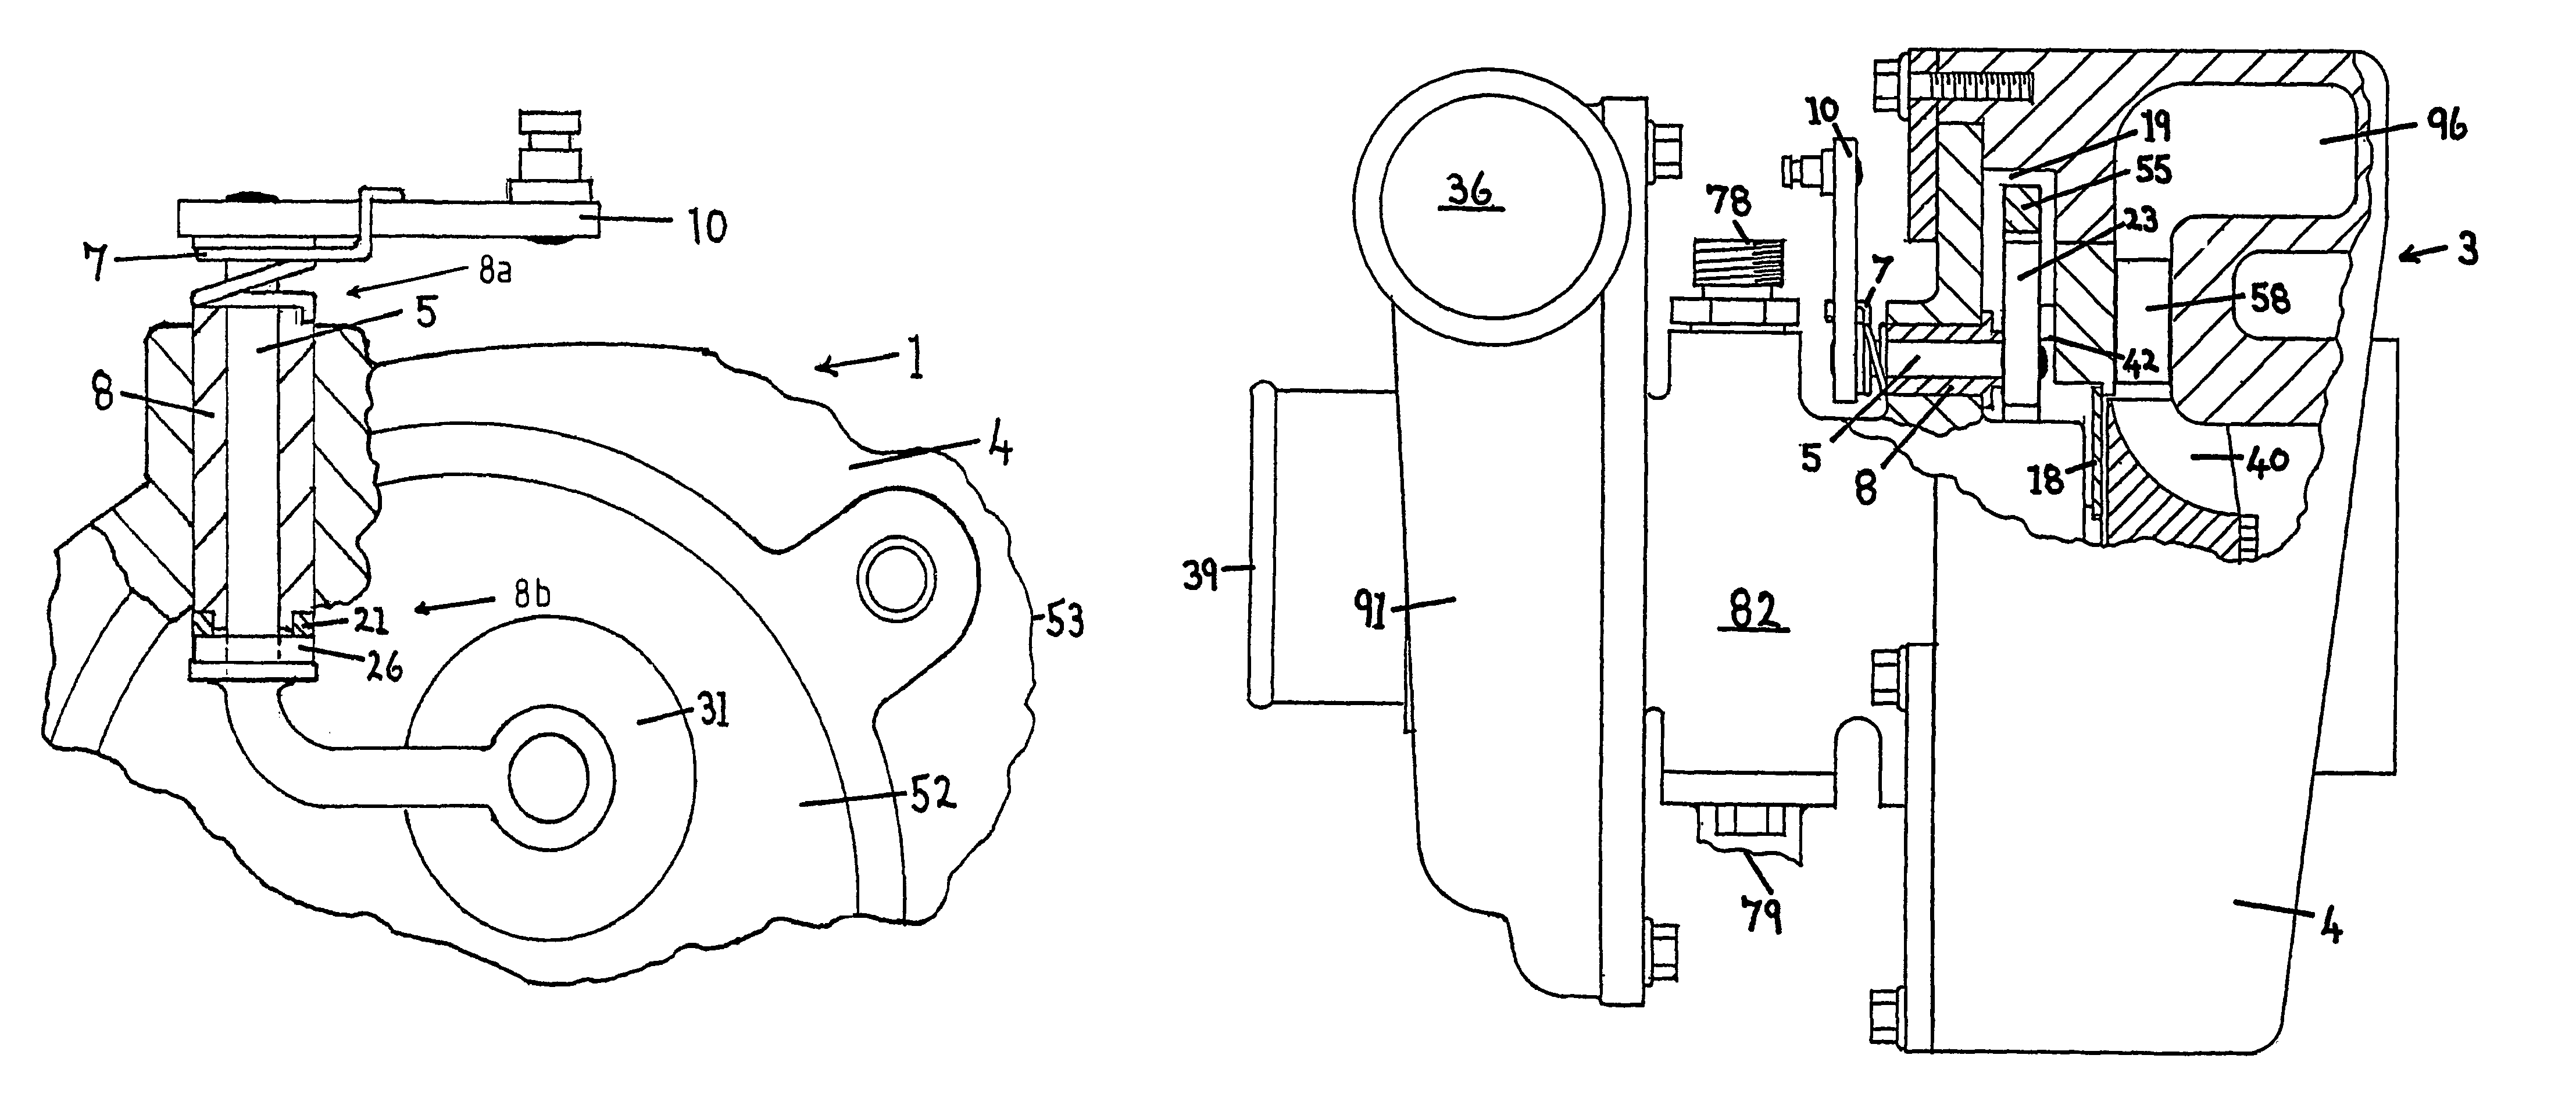 Turbocharger apparatus having an exhaust gas sealing system for preventing gas leakage from the turbocharger apparatus